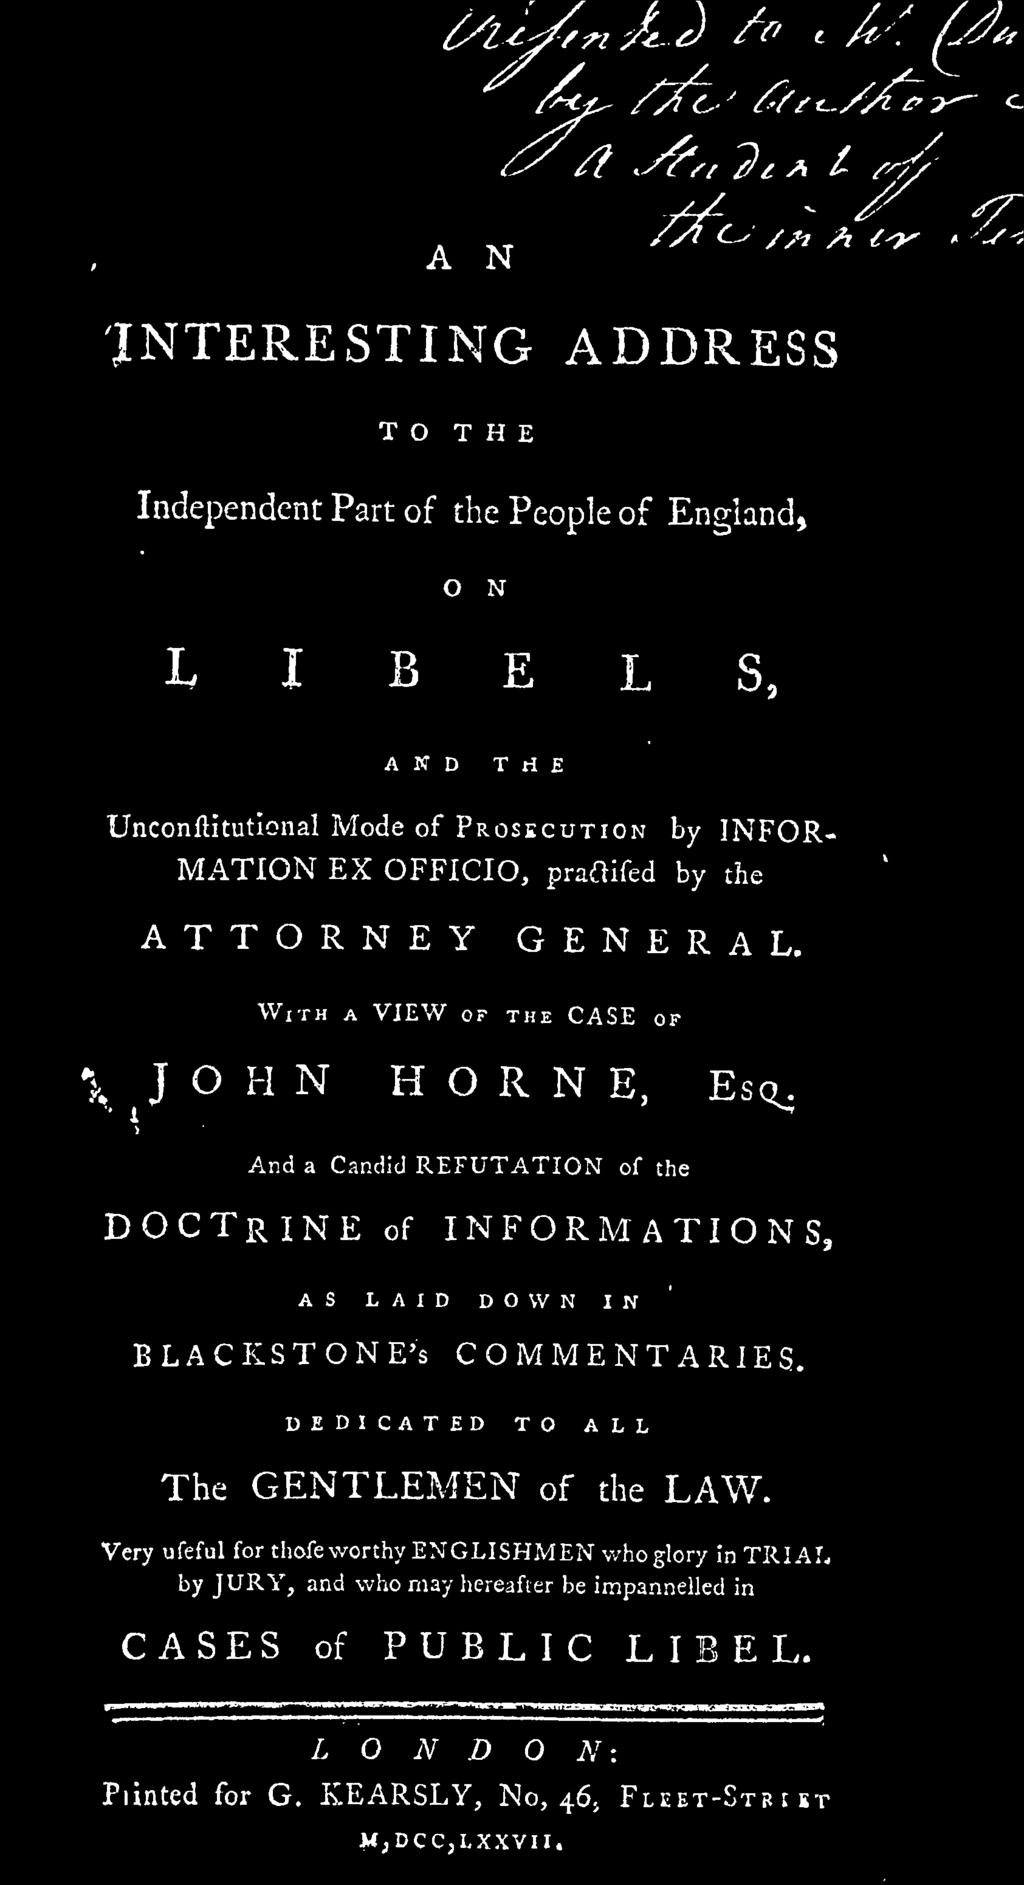 ATIONS, AS LAID DOWN IN BLACESTONE's COMMENTARIES. DEDICATED TO ALL The GENTLEMEN of the LAW.